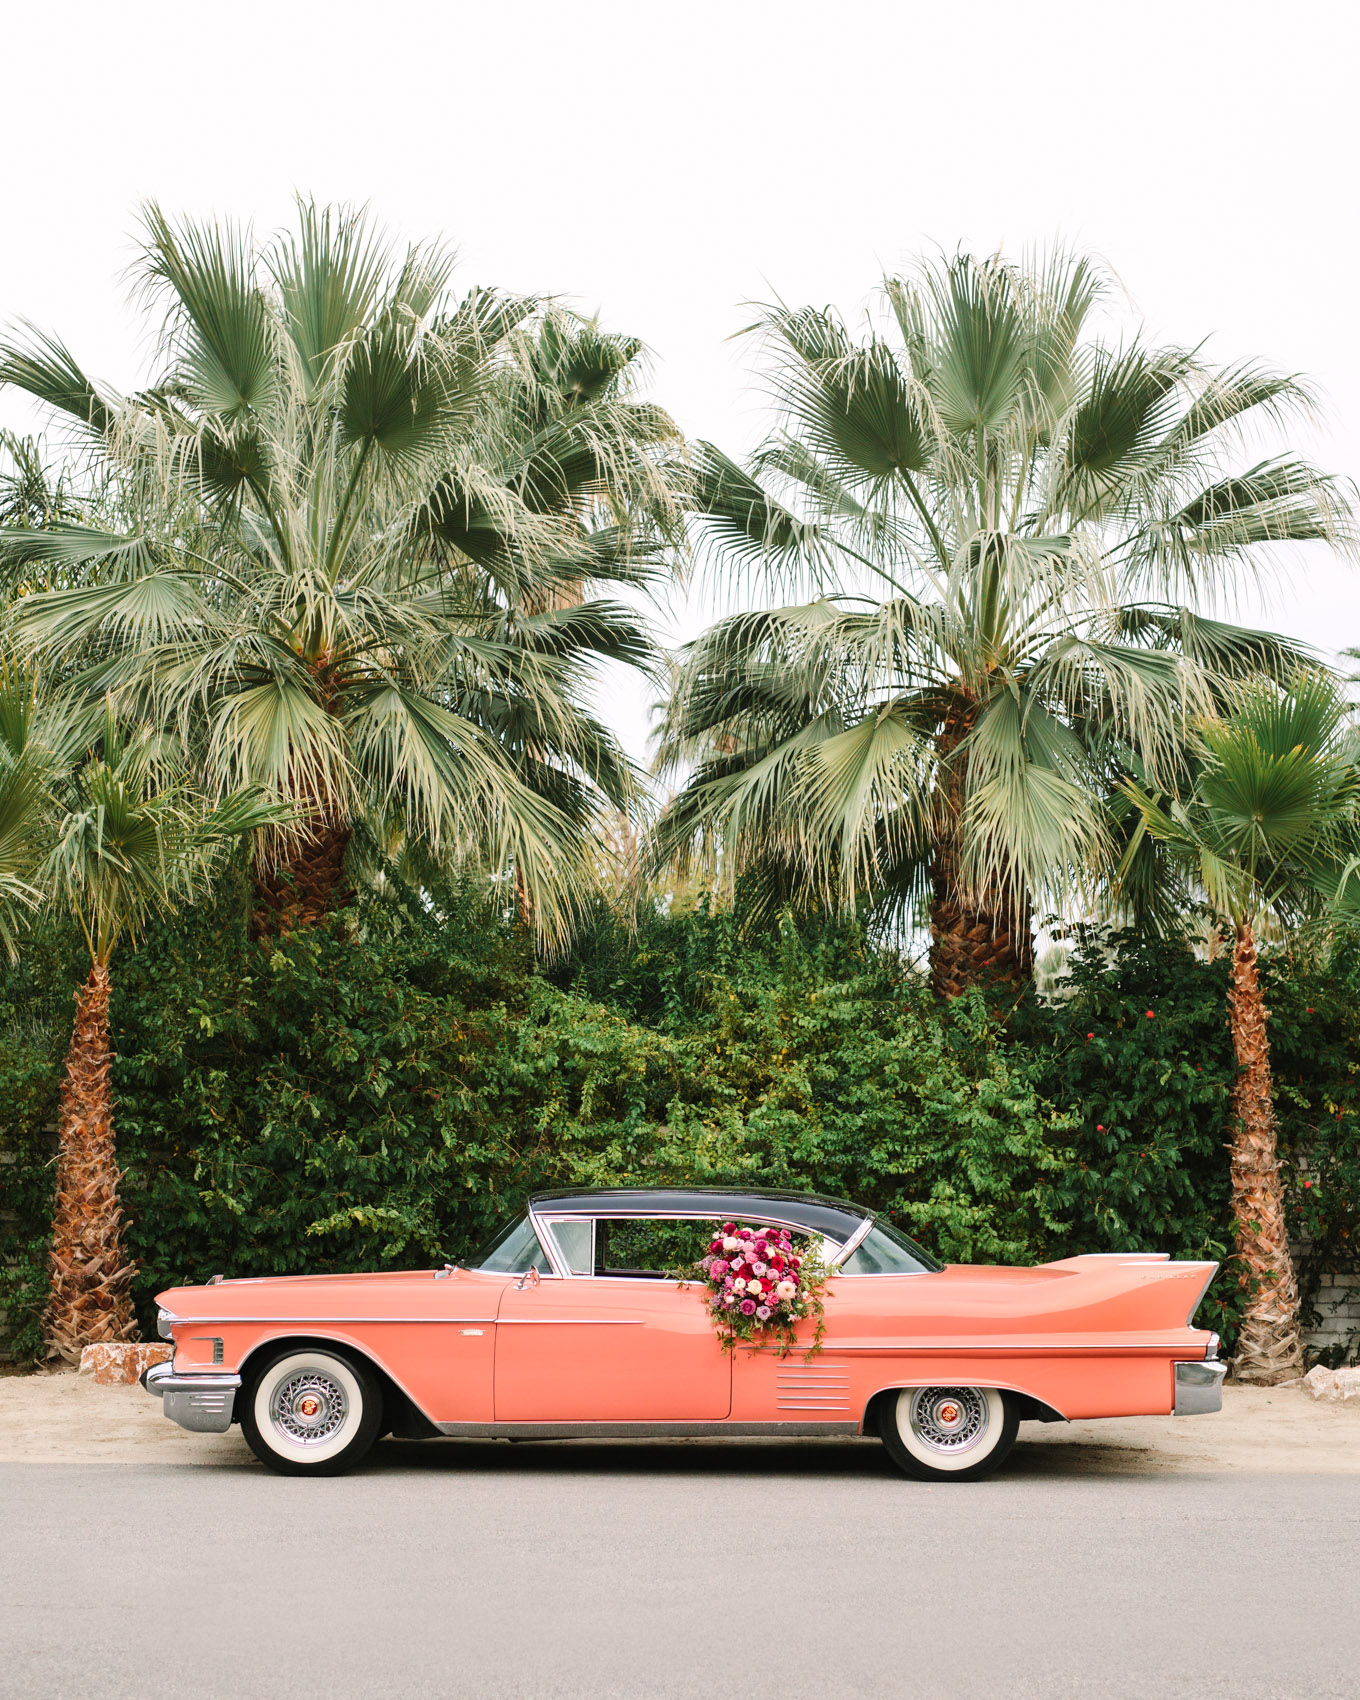 Coral classic car outside Casa De Monte Vista. Modern vintage-inspired Palm Springs engagement session with a 1960s pink Cadillac, retro clothing, and flowers by Shindig Chic. | Colorful and elevated wedding inspiration for fun-loving couples in Southern California | #engagementsession #PalmSpringsengagement #vintageweddingdress #floralcar #pinkcar   Source: Mary Costa Photography | Los Angeles